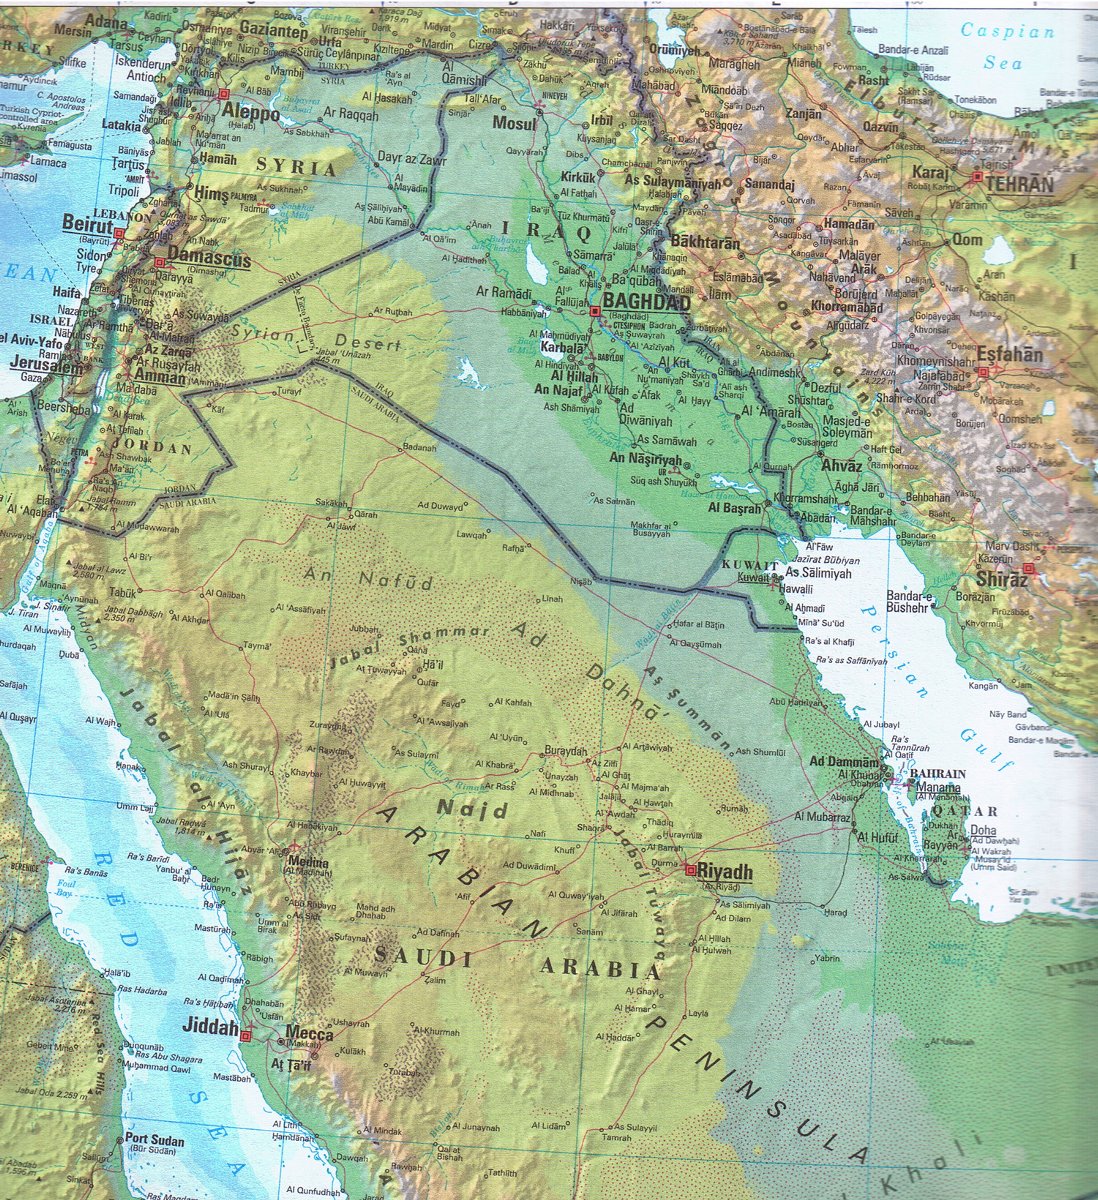 https://einarbb.blog.is/users/72/einarbb/img/large_detailed_topographical_and_political_map_of_iraq.jpg